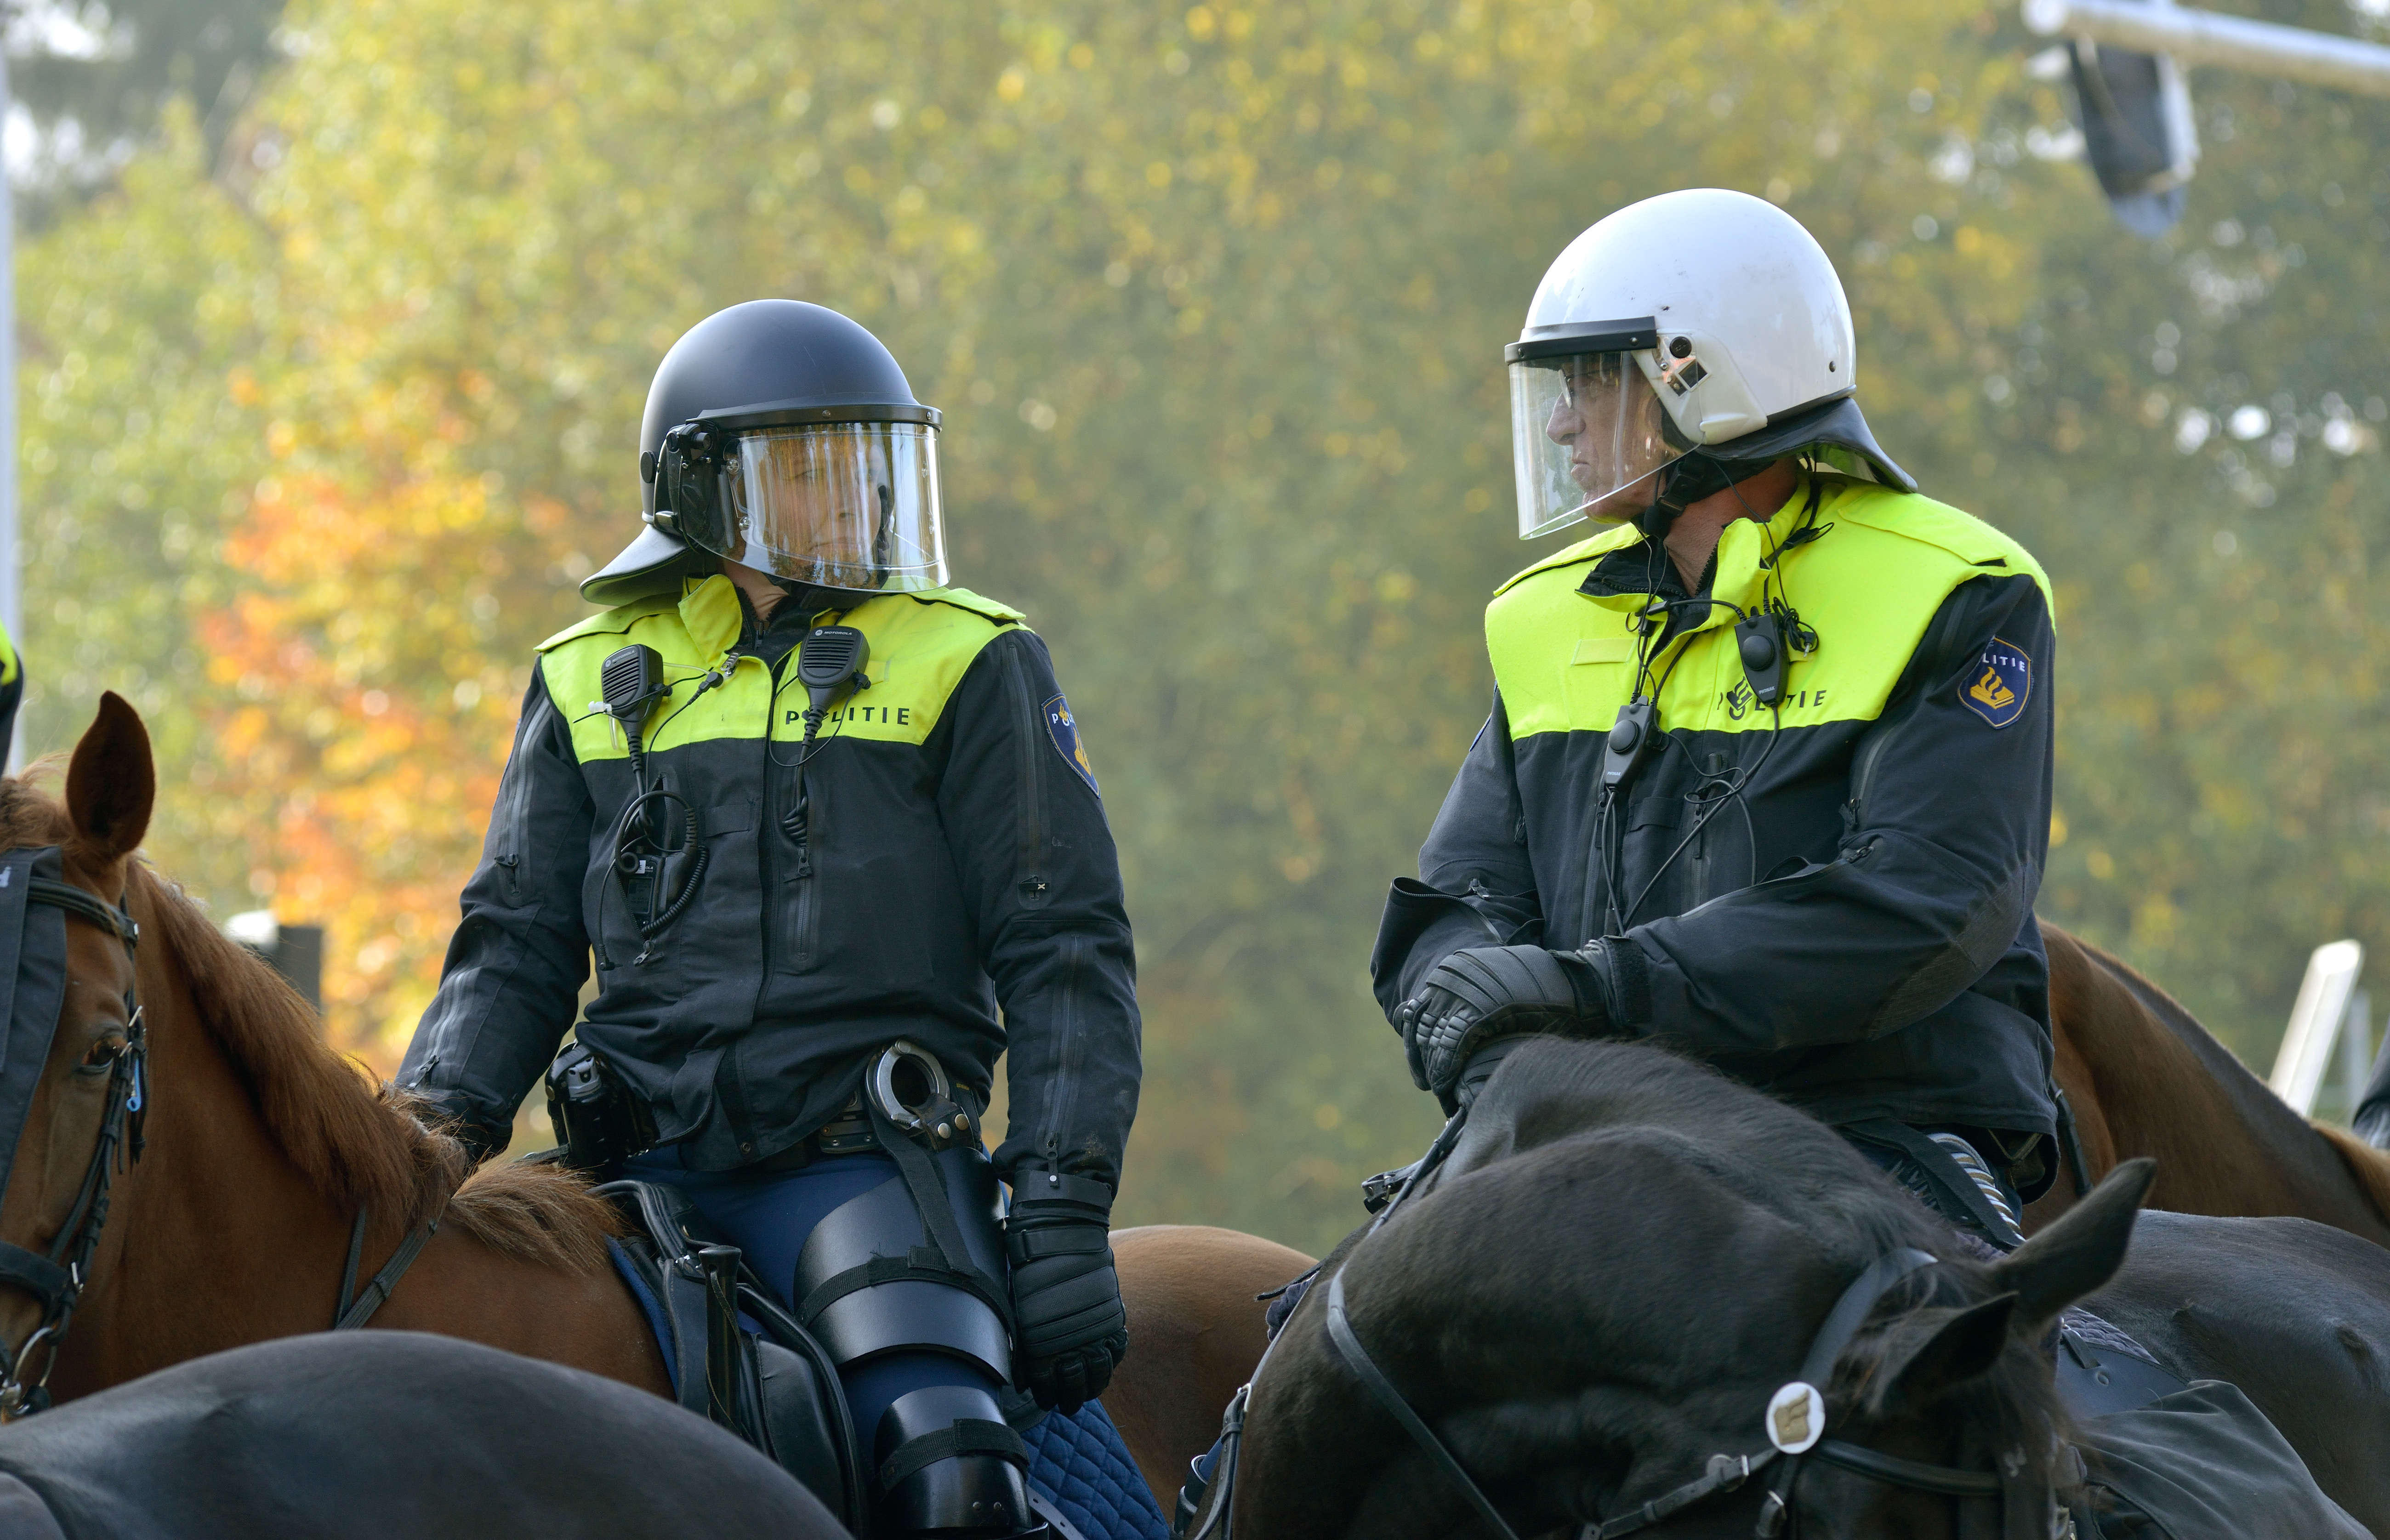 ww-lco2-police on horse